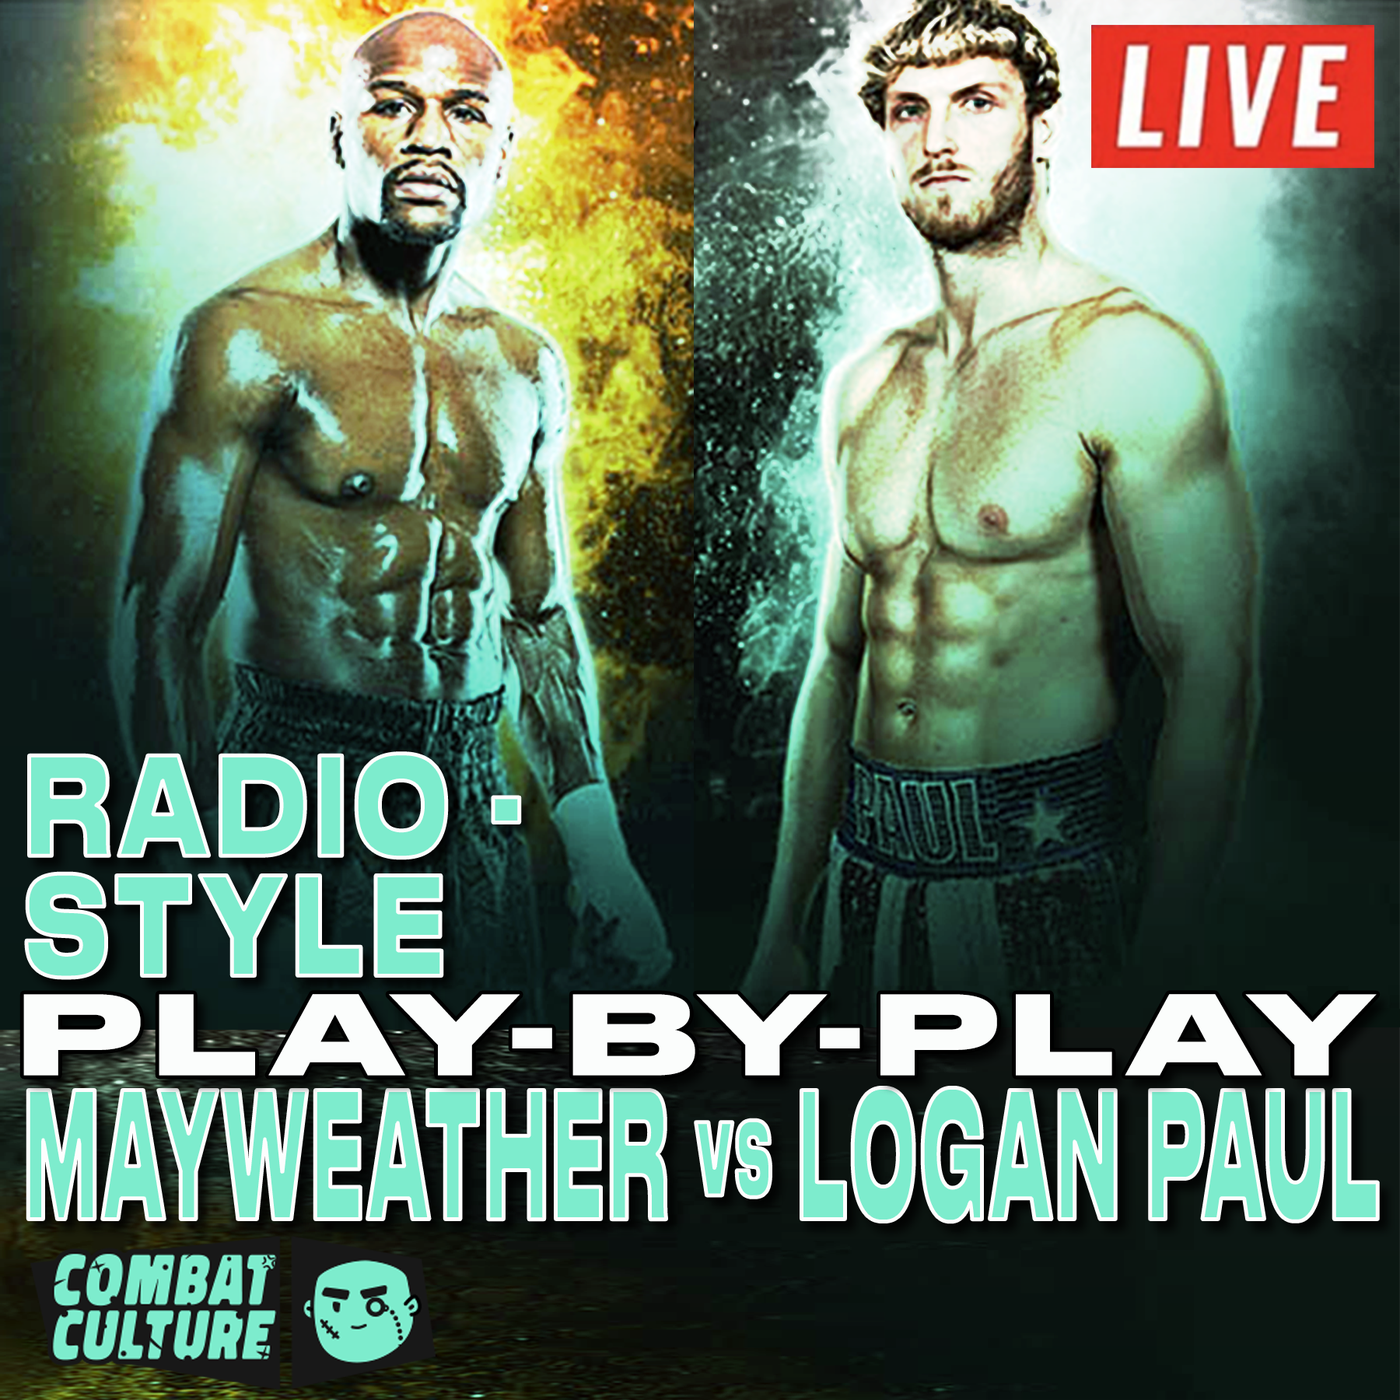 Paul logan time vs mayweather floyd What time